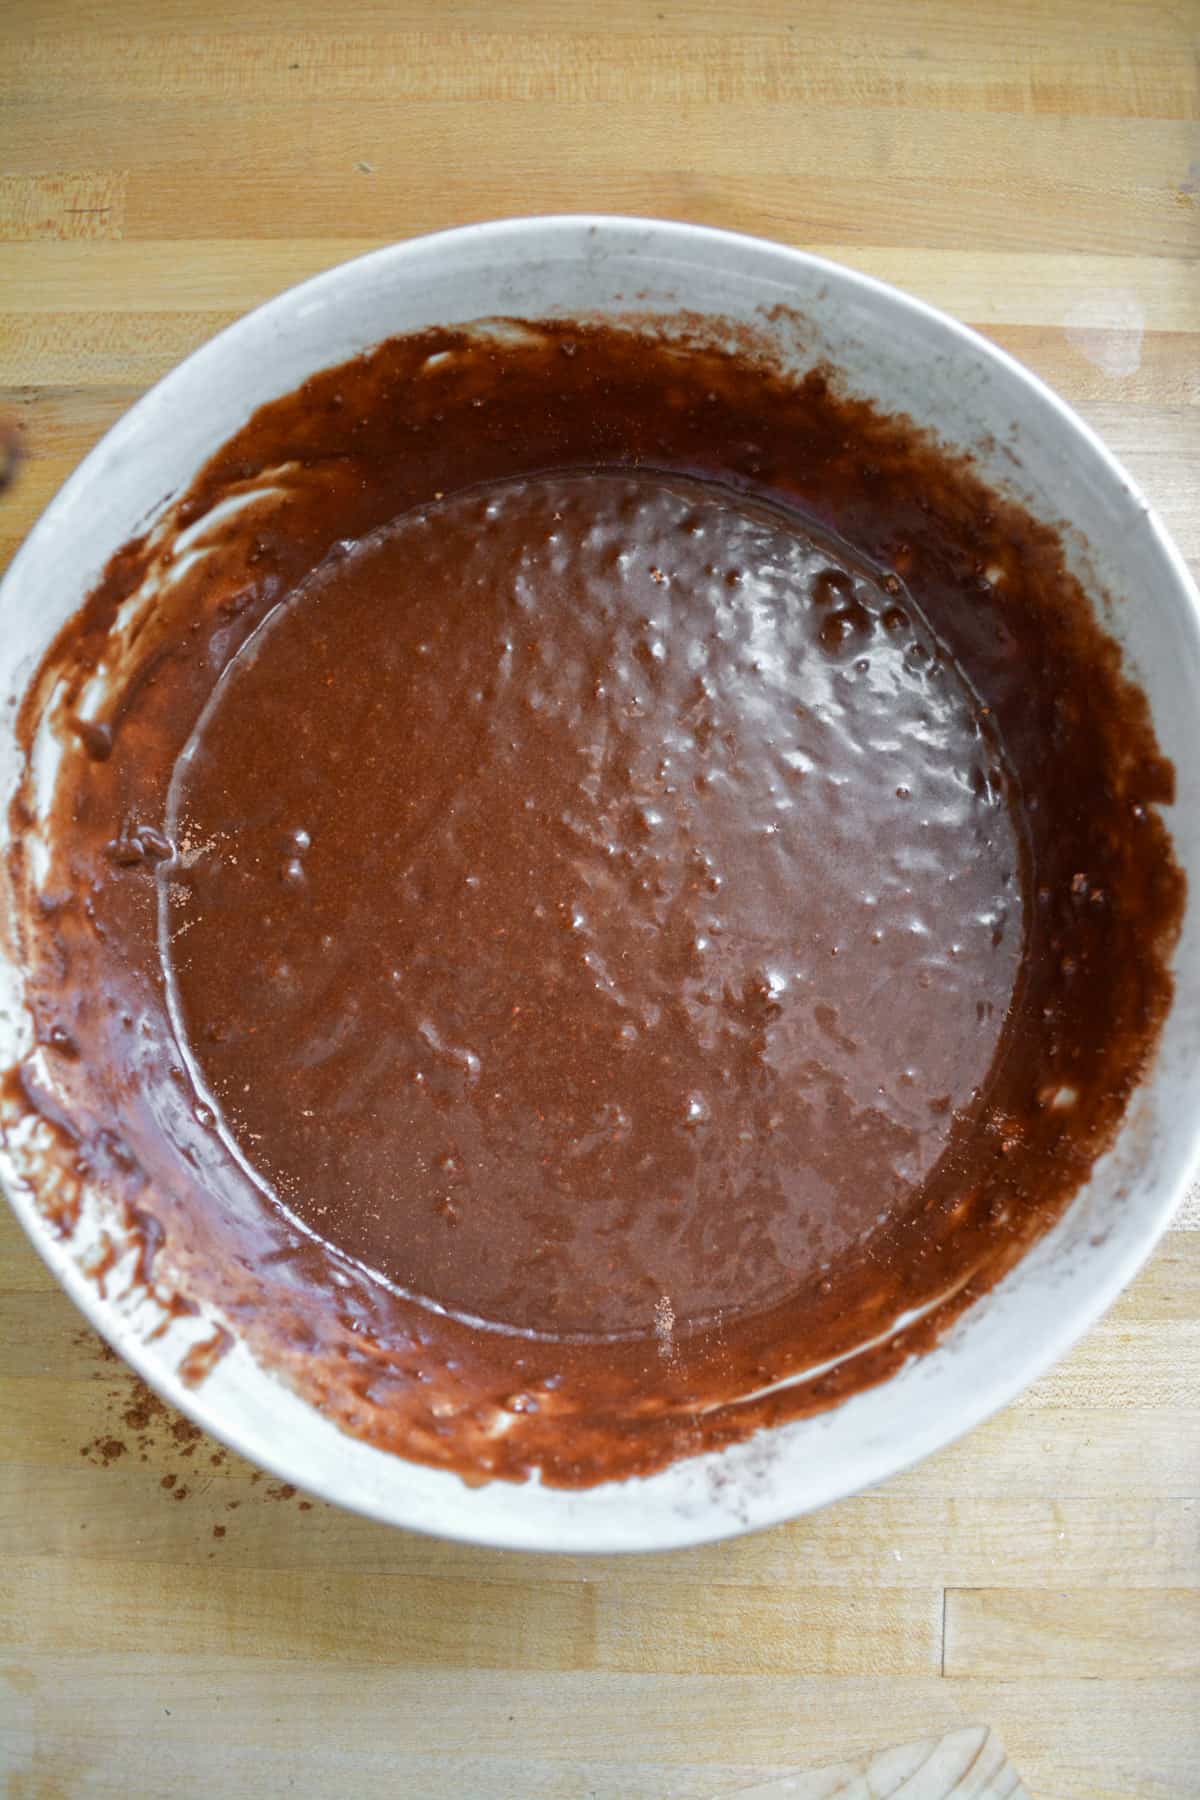 Cocoa powder whisked into the wet ingredients in a mixing bowl.